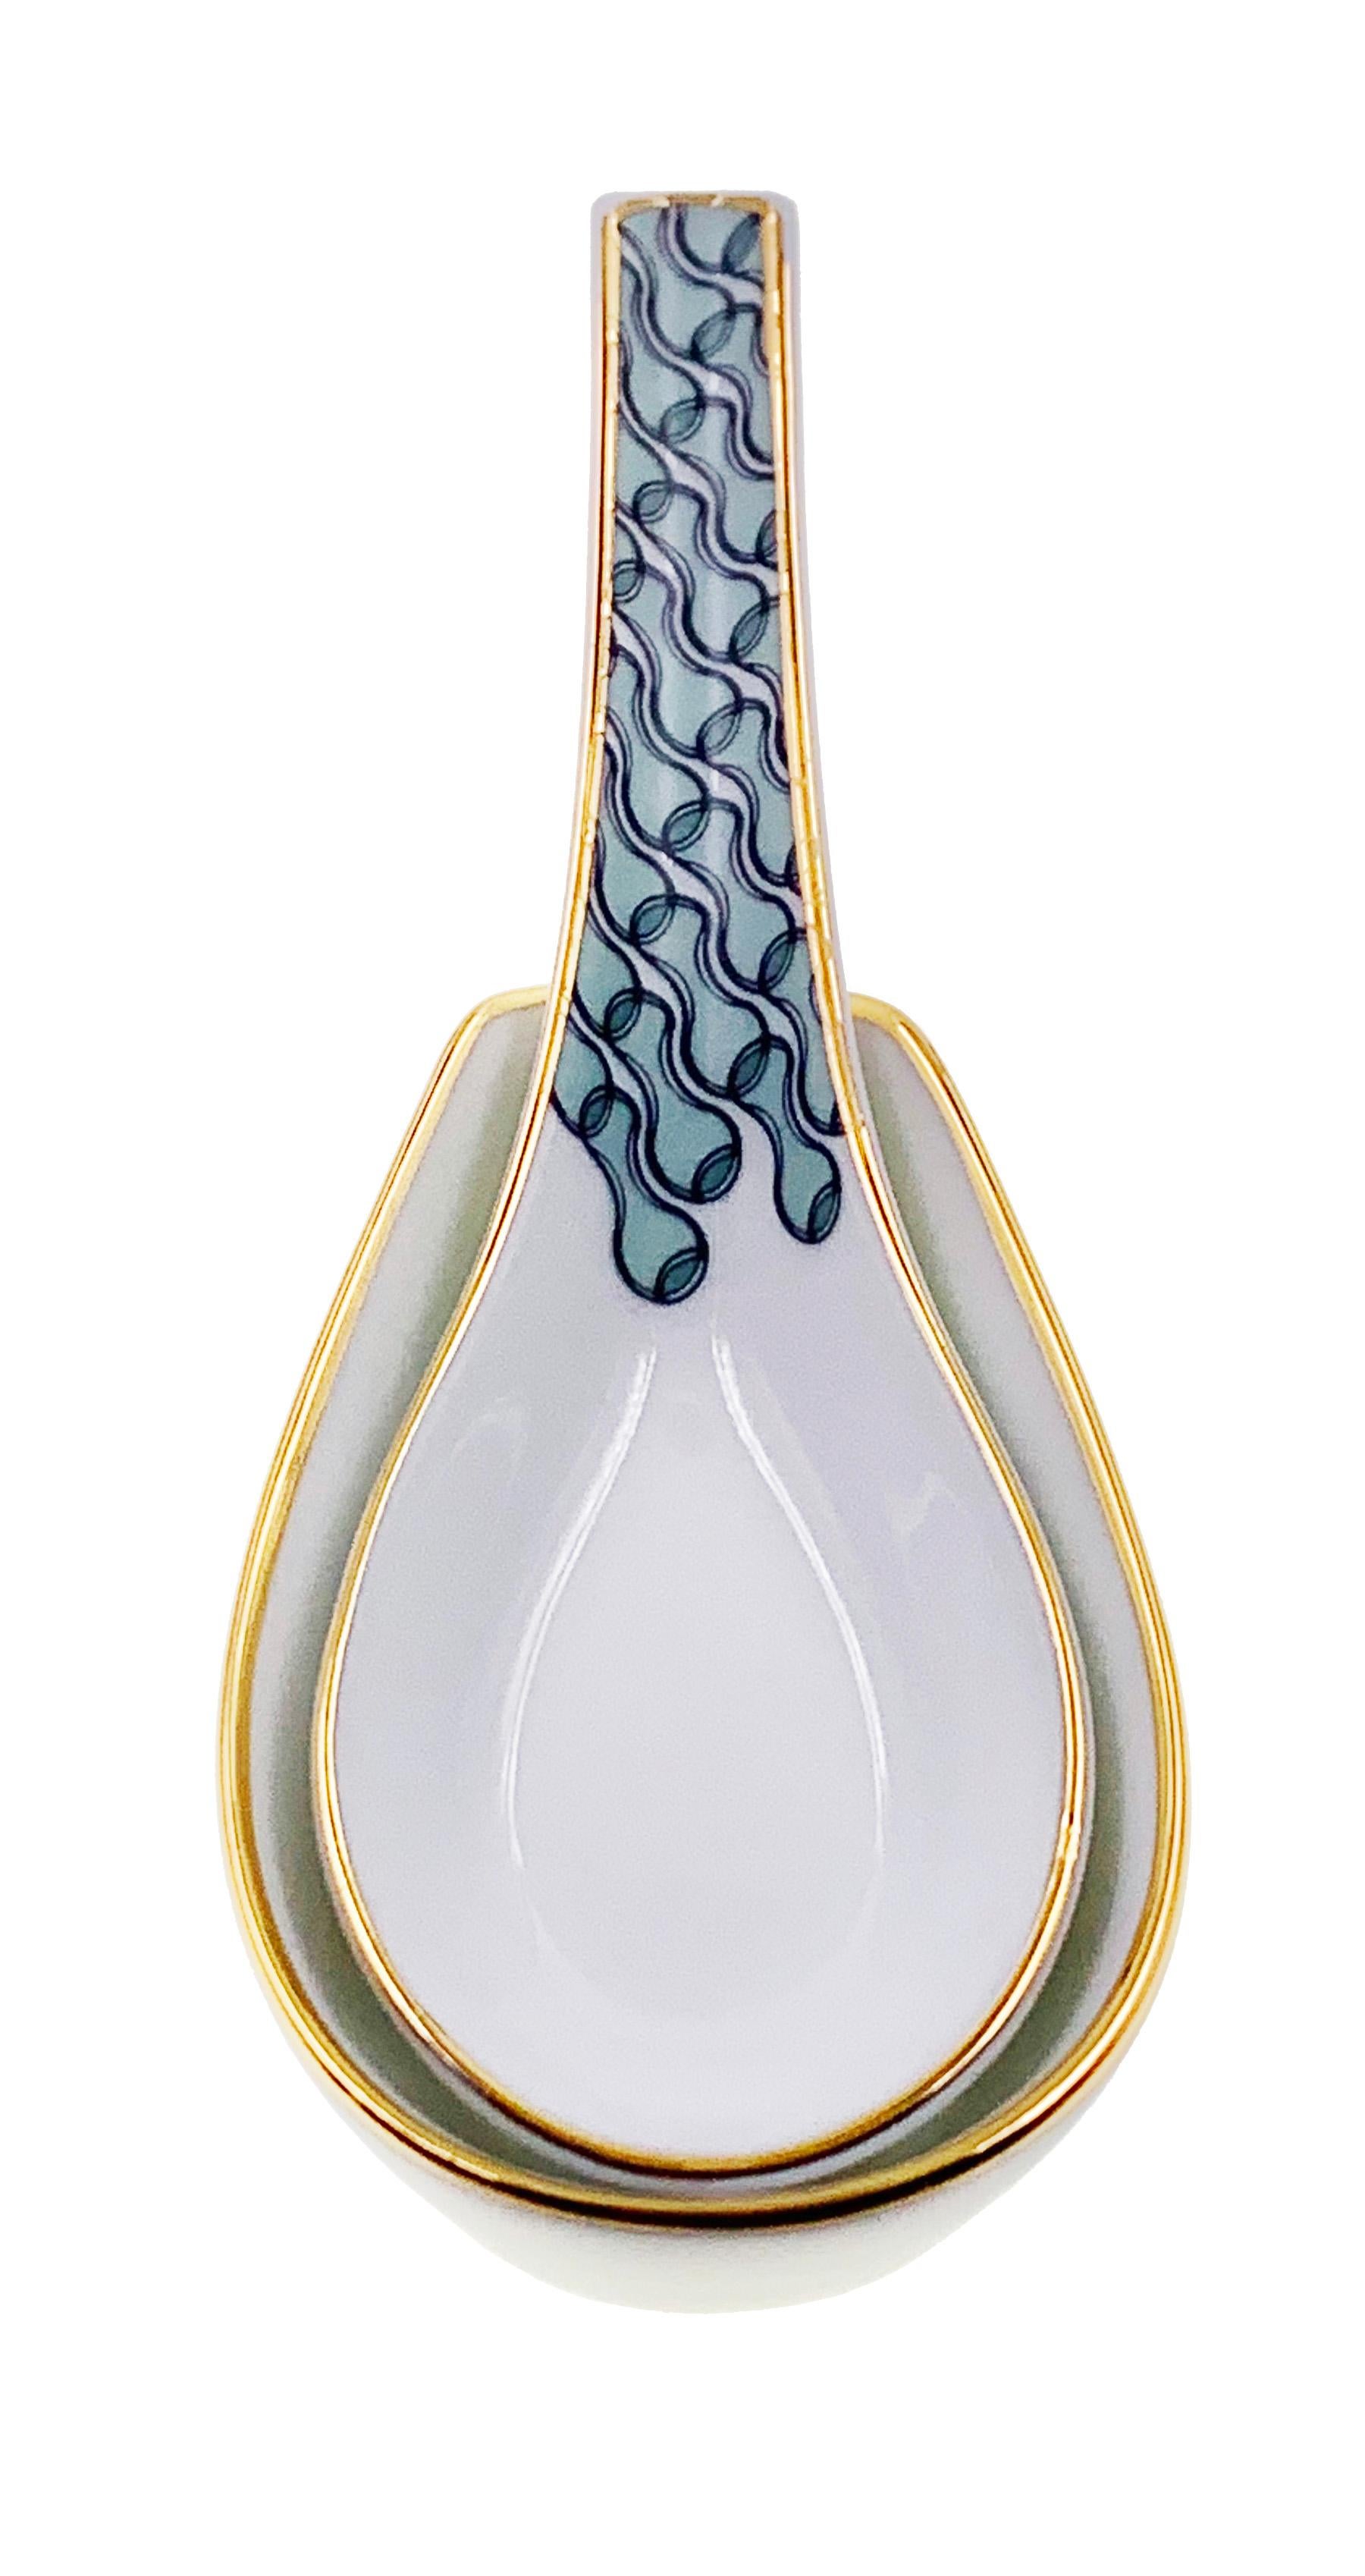 Larger quantities available upon request, with 8 weeks production time.

Description: Chinese spoon with spoon holder set (2 pieces)
Color: Sage green
Size: 13.5 x 4.5 H, 9 x 5.5 x 2 H cm
Material: Porcelain and gold
Collection: Mid Century Rhythm